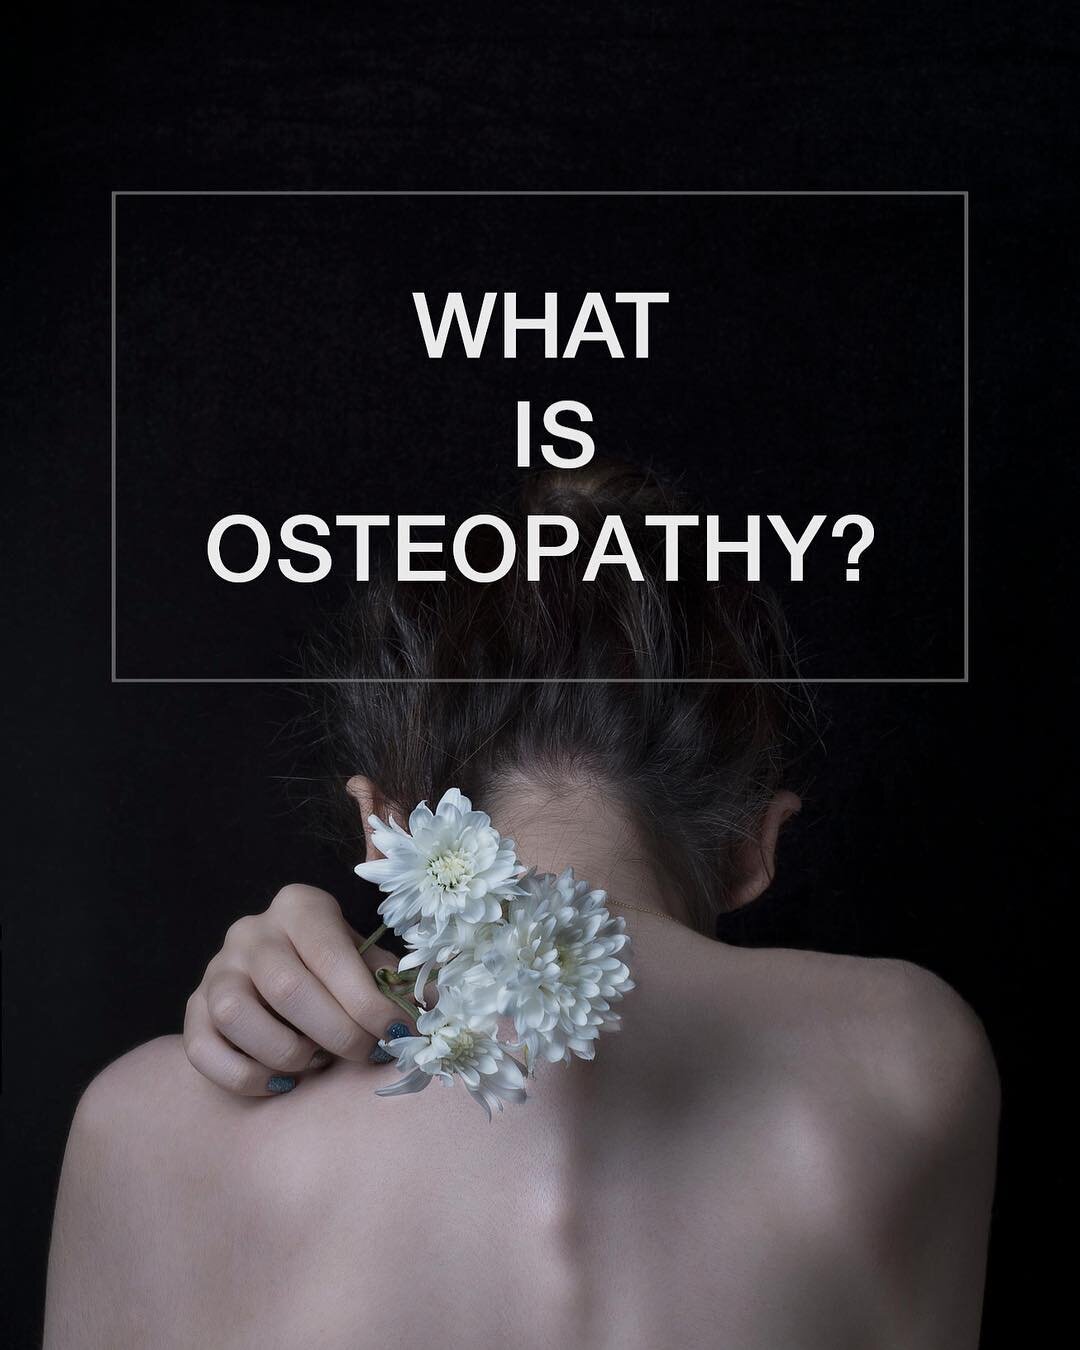 Osteopathy is a form of manual medicine which recognises the important link between the structure of the body and the way it functions. Osteopaths assist healing by focusing on how the skeleton, joints, muscles, nerves, circulation, connective tissue